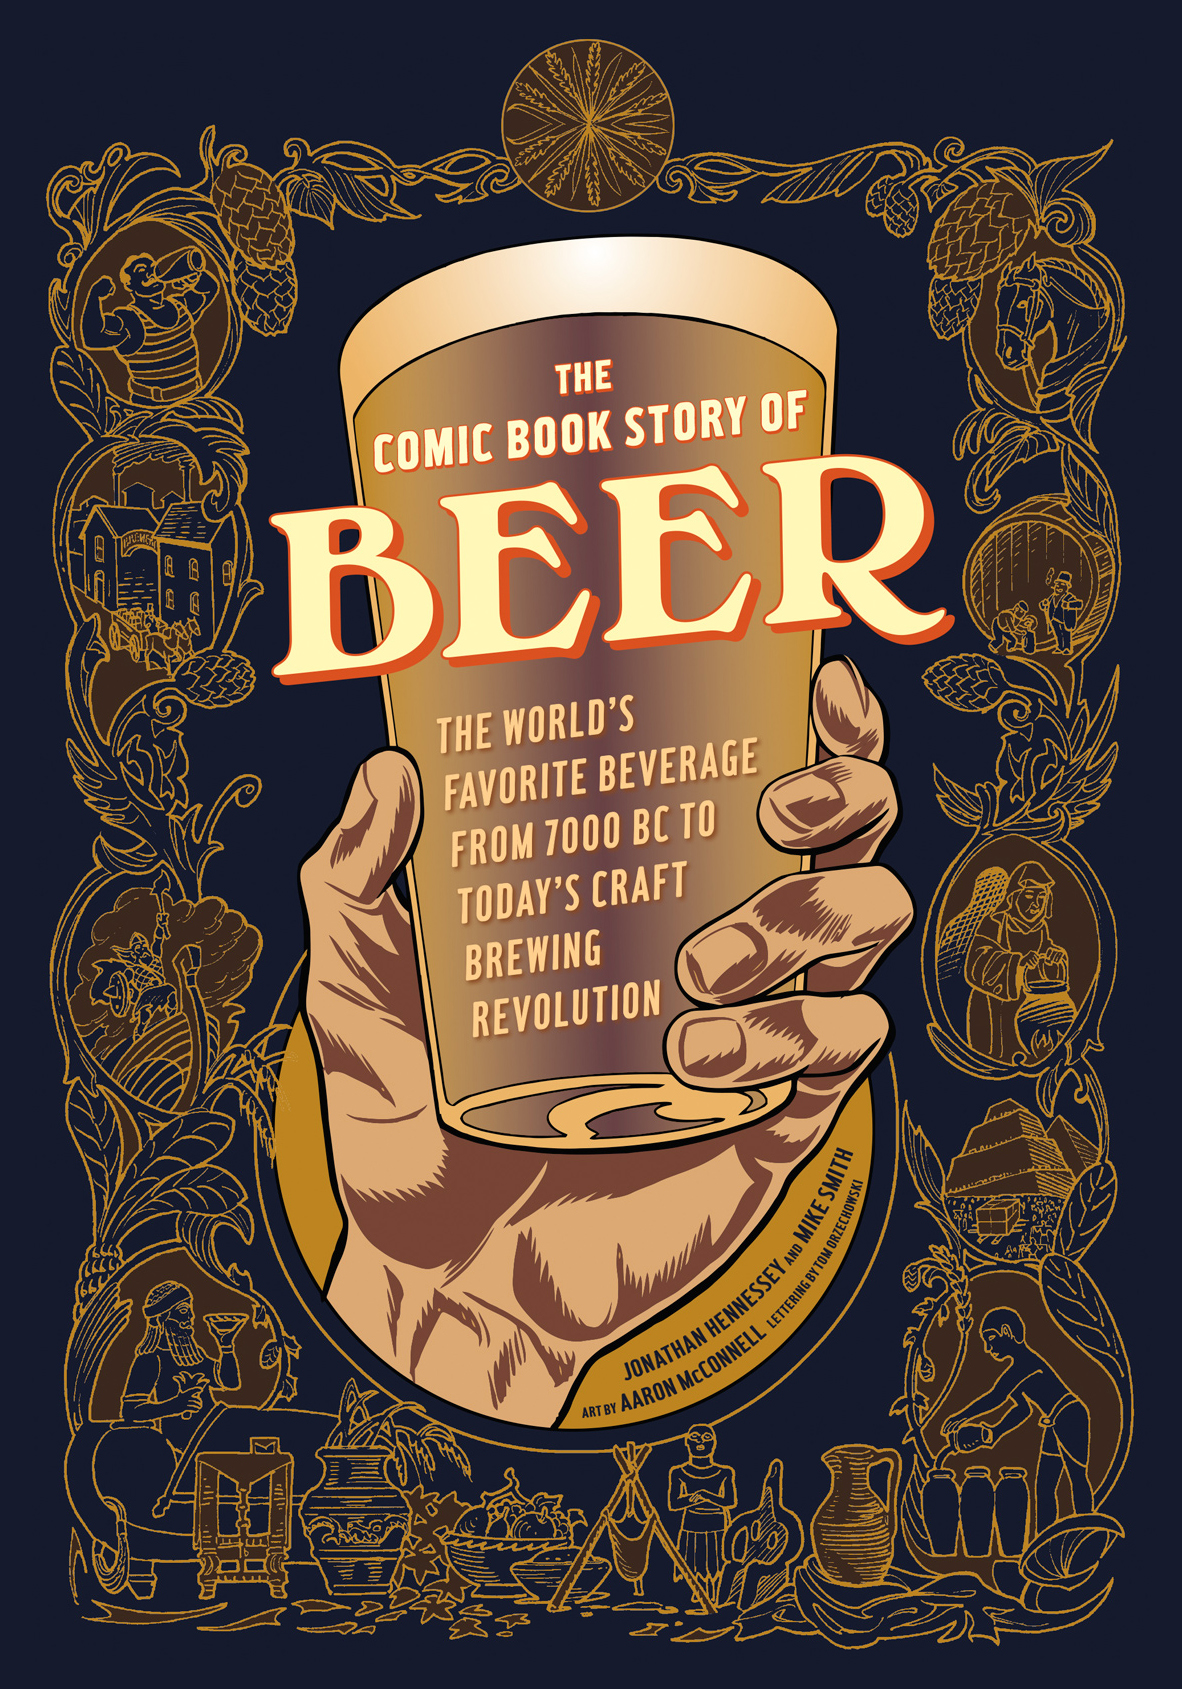 Read online The Comic Book Story of Beer comic -  Issue # Full - 1